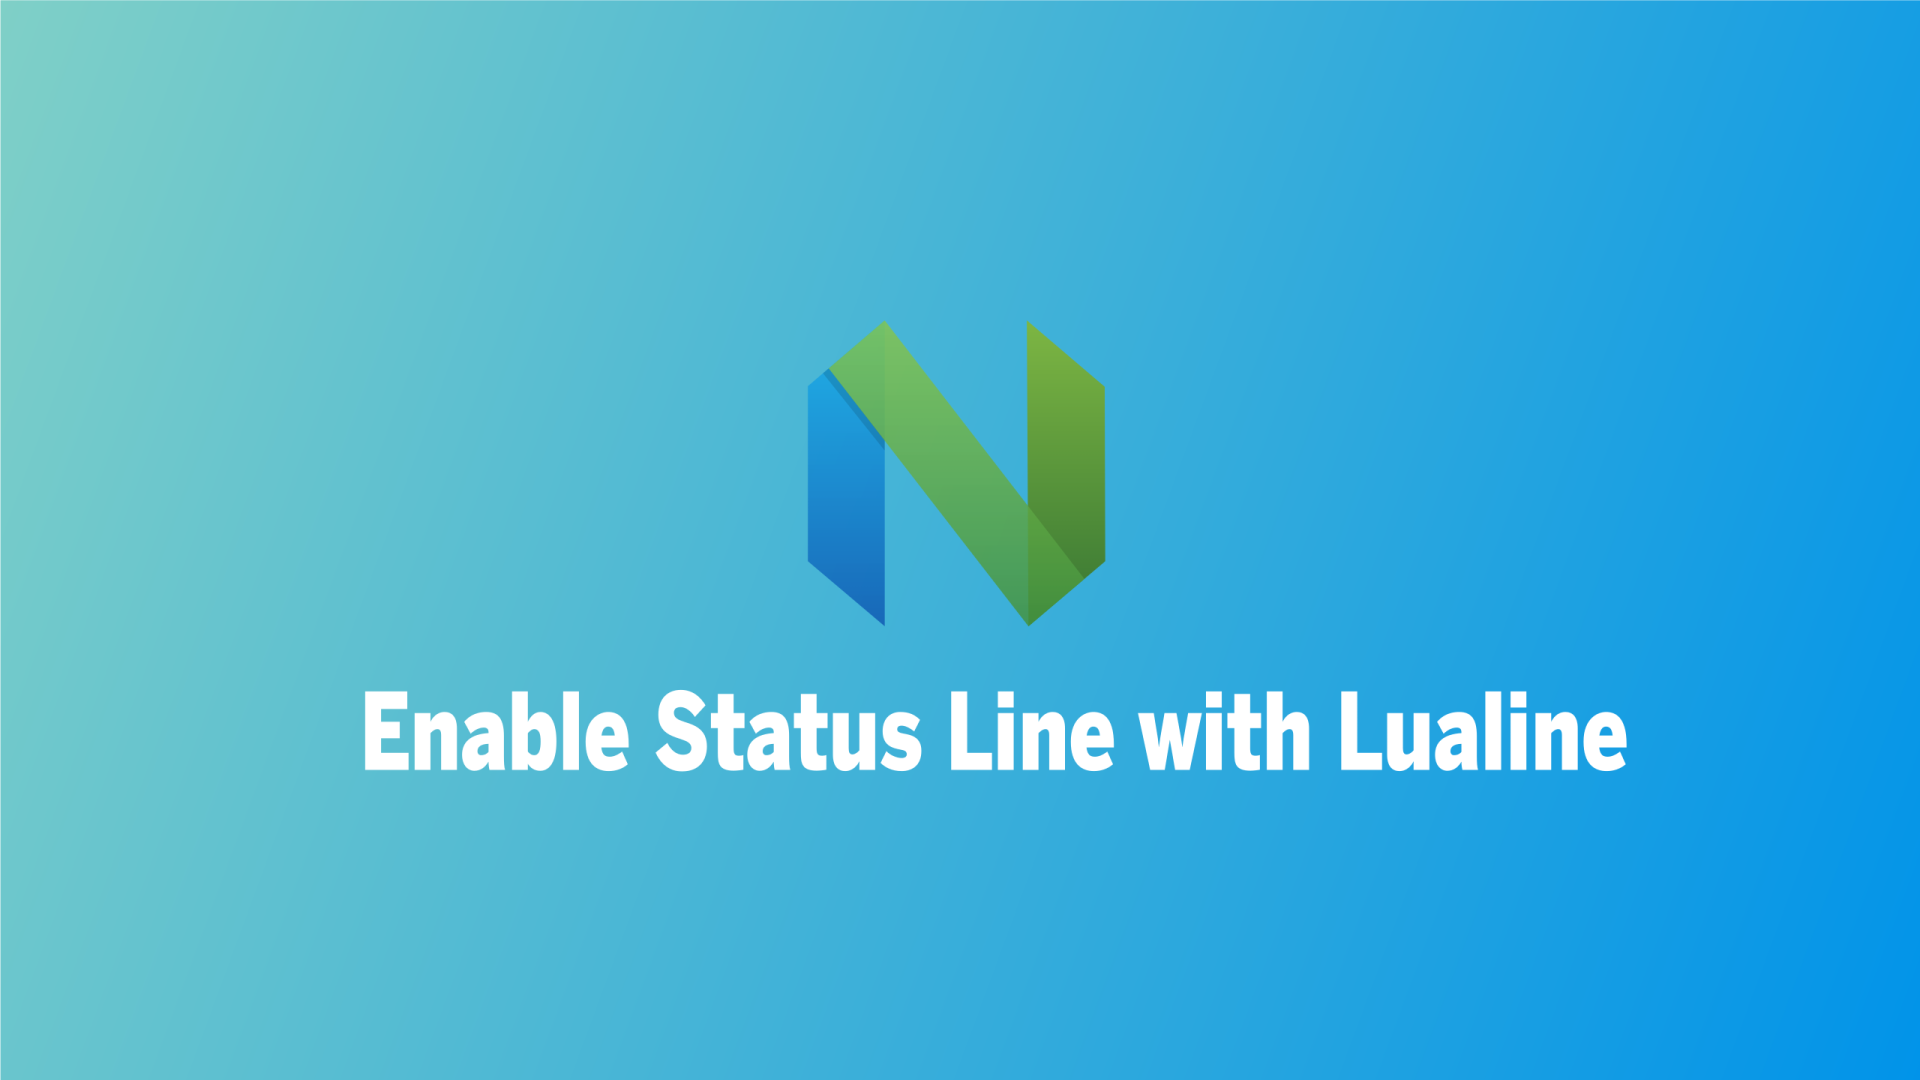 Enable the Status Line with Lualine in Neovim